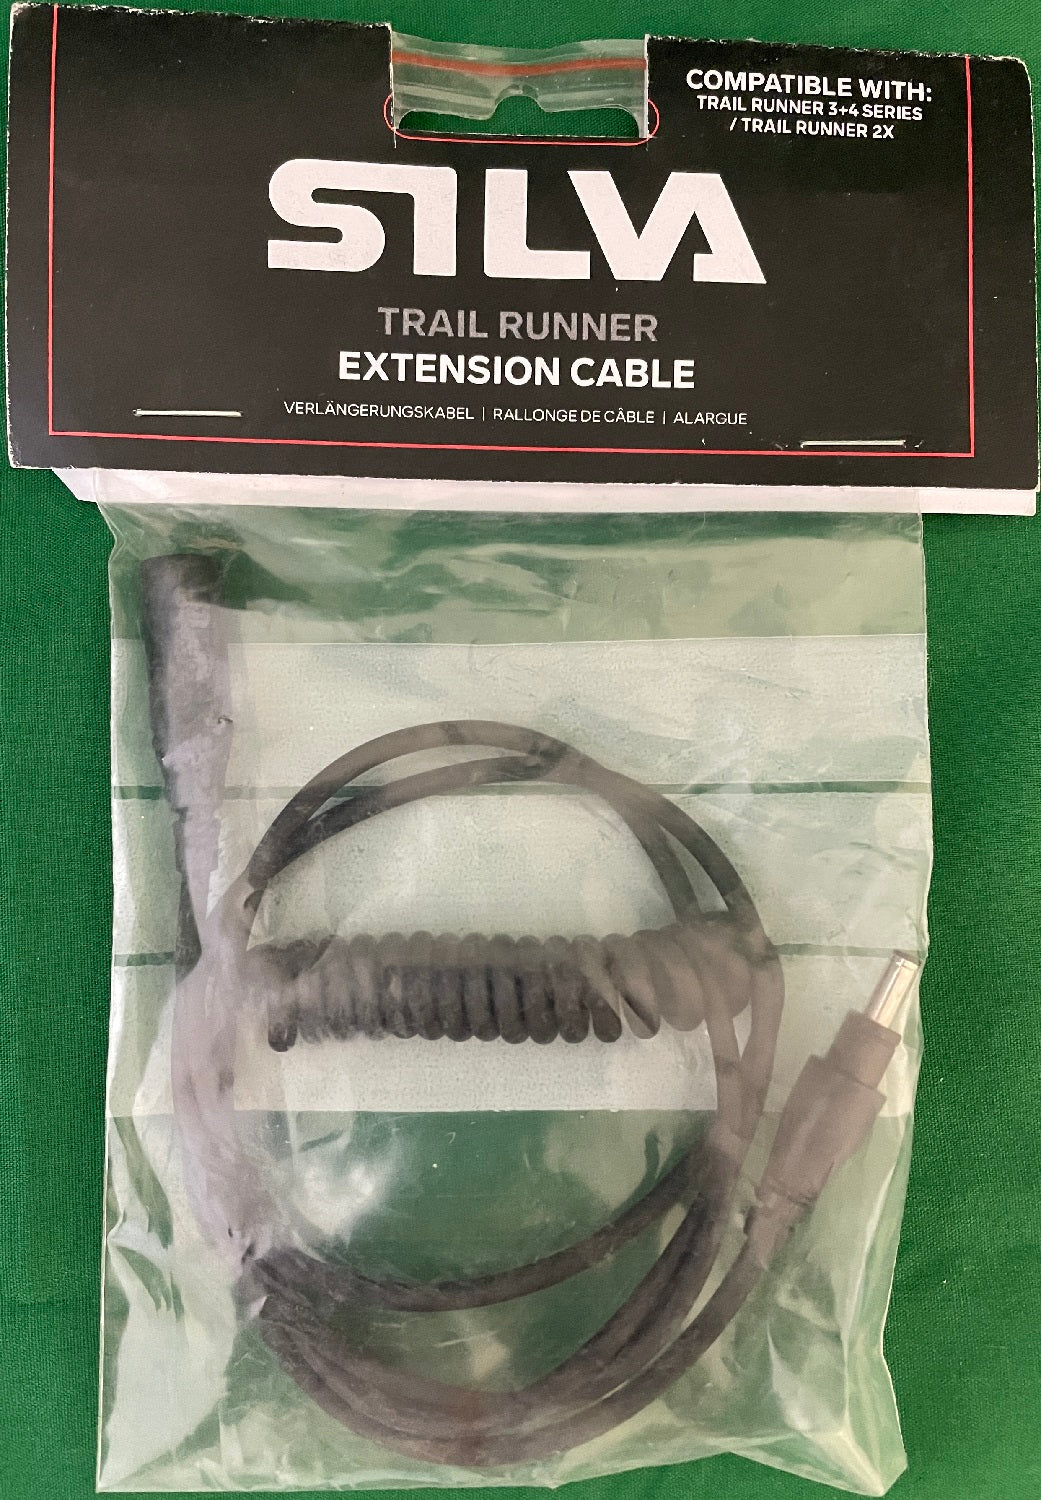 Silva Extension Cable for Trail Runner 4 Headlamp